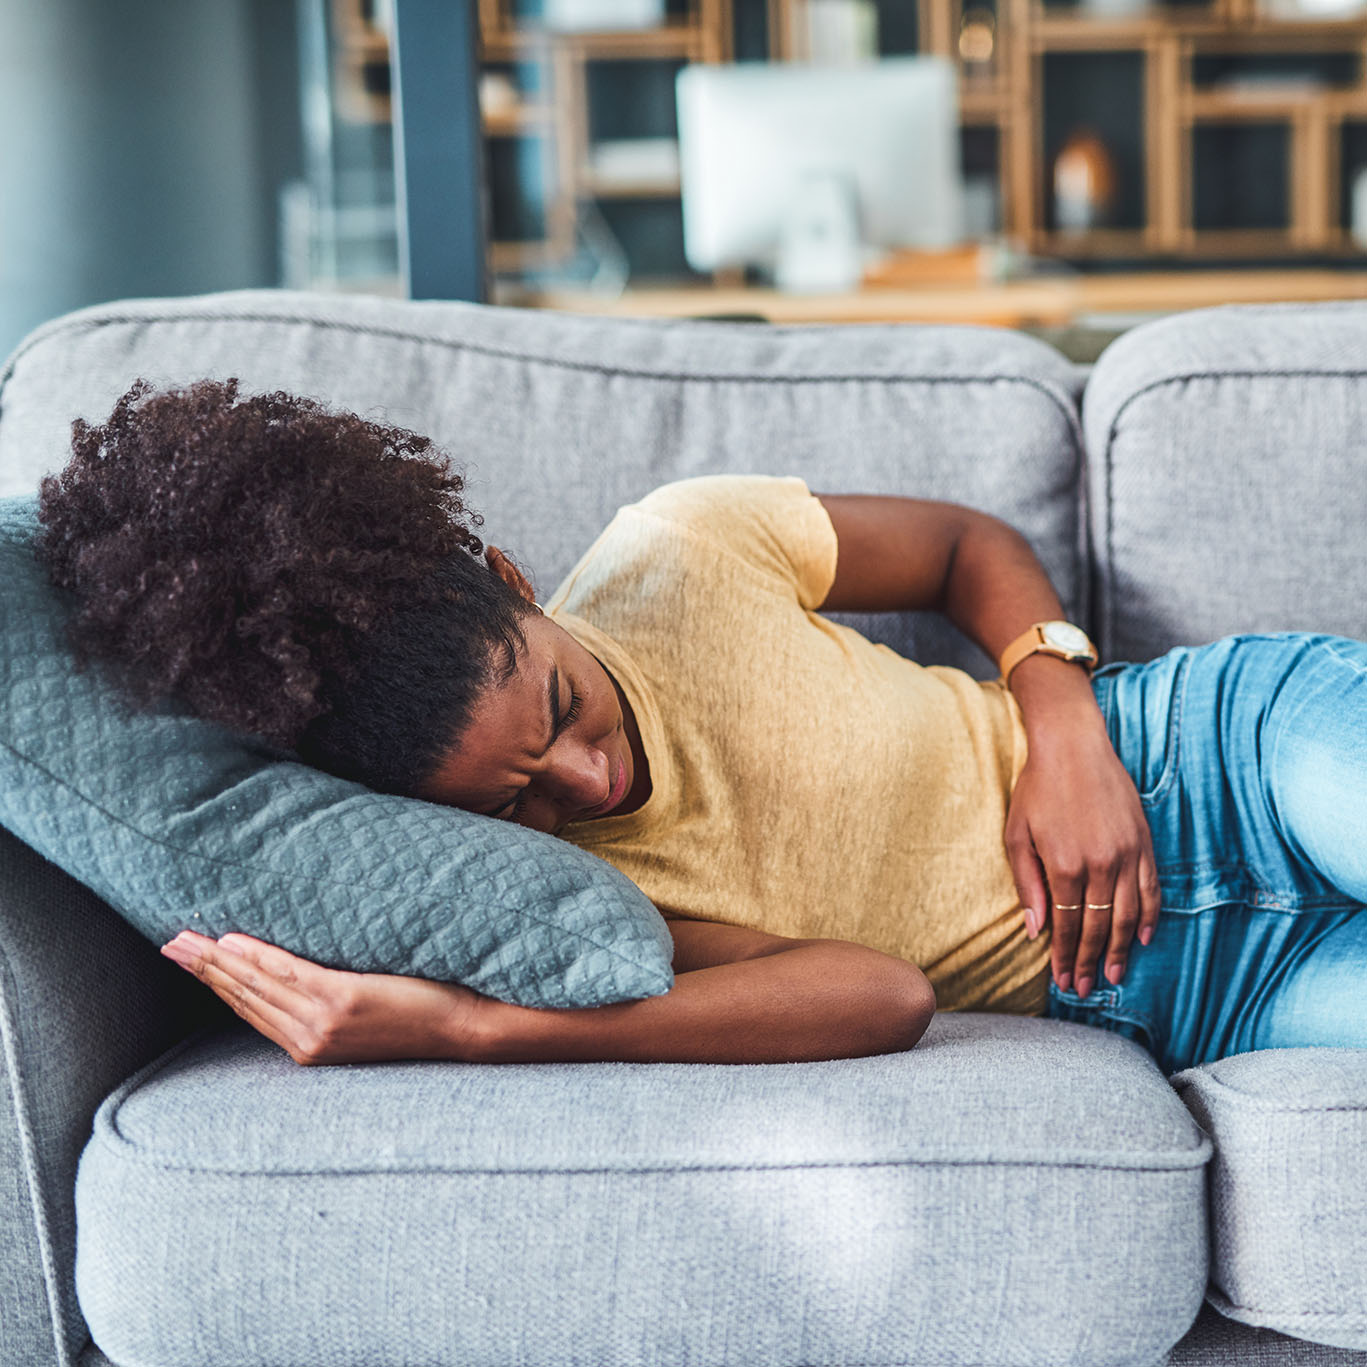 black woman lying down with her hand on her stomach in pain on gray couch